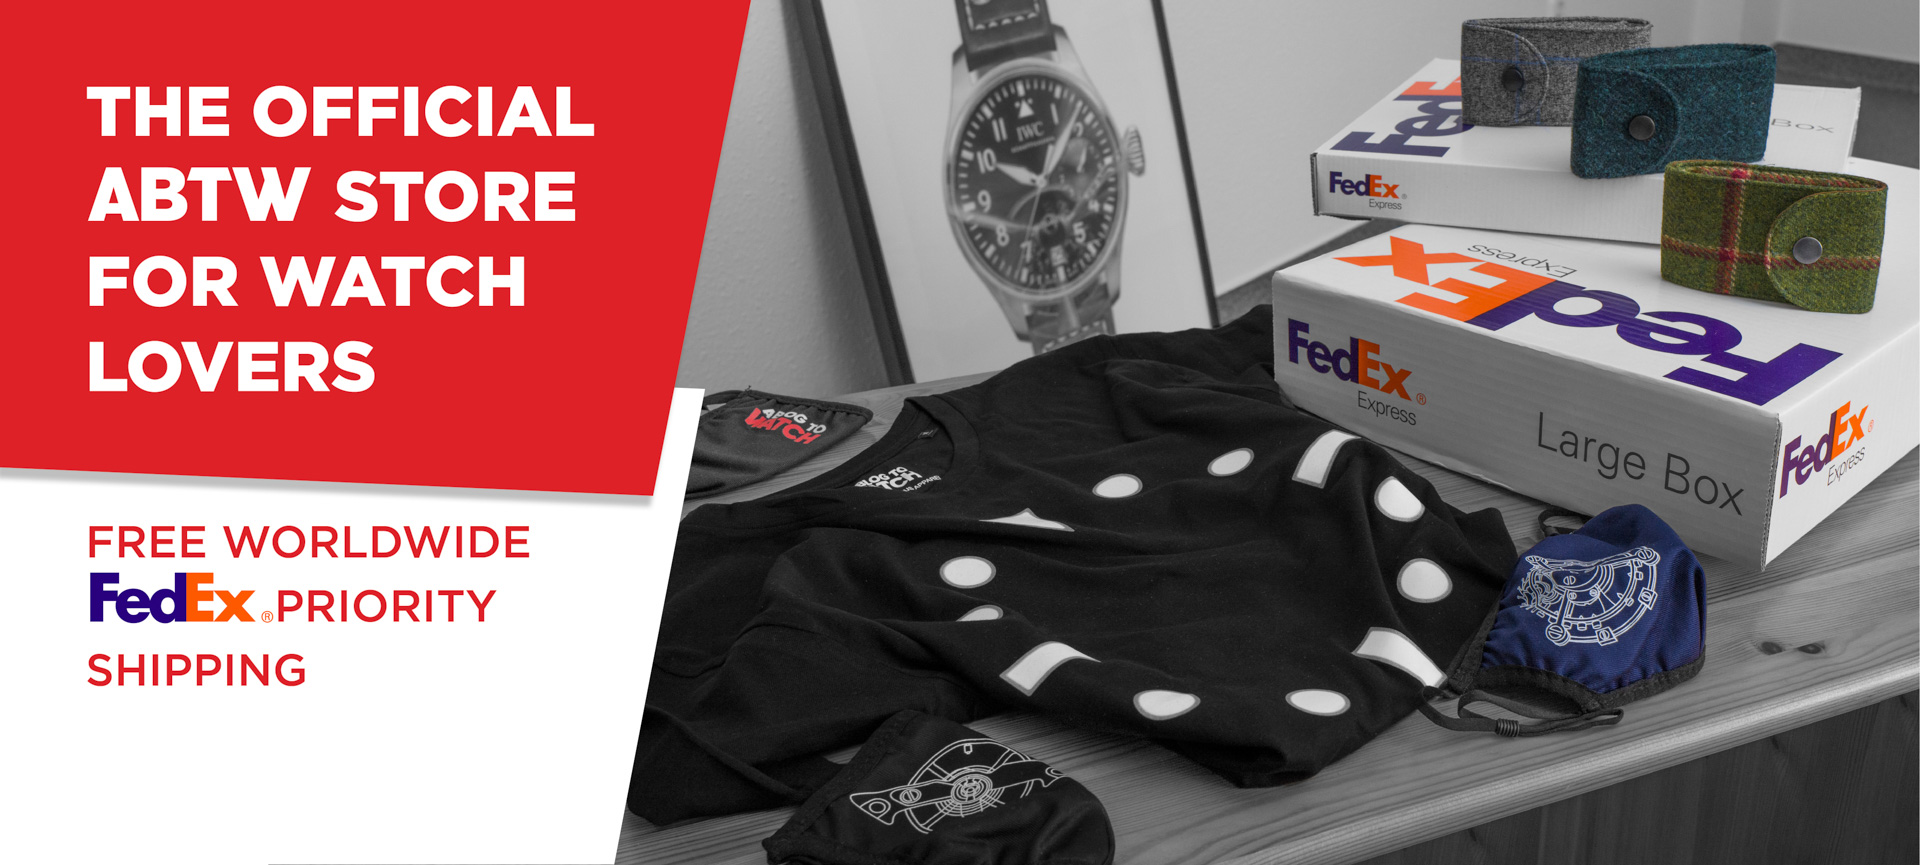 The aBlogtoWatch Store Now Offers Free FedEx Priority Shipping Worldwide